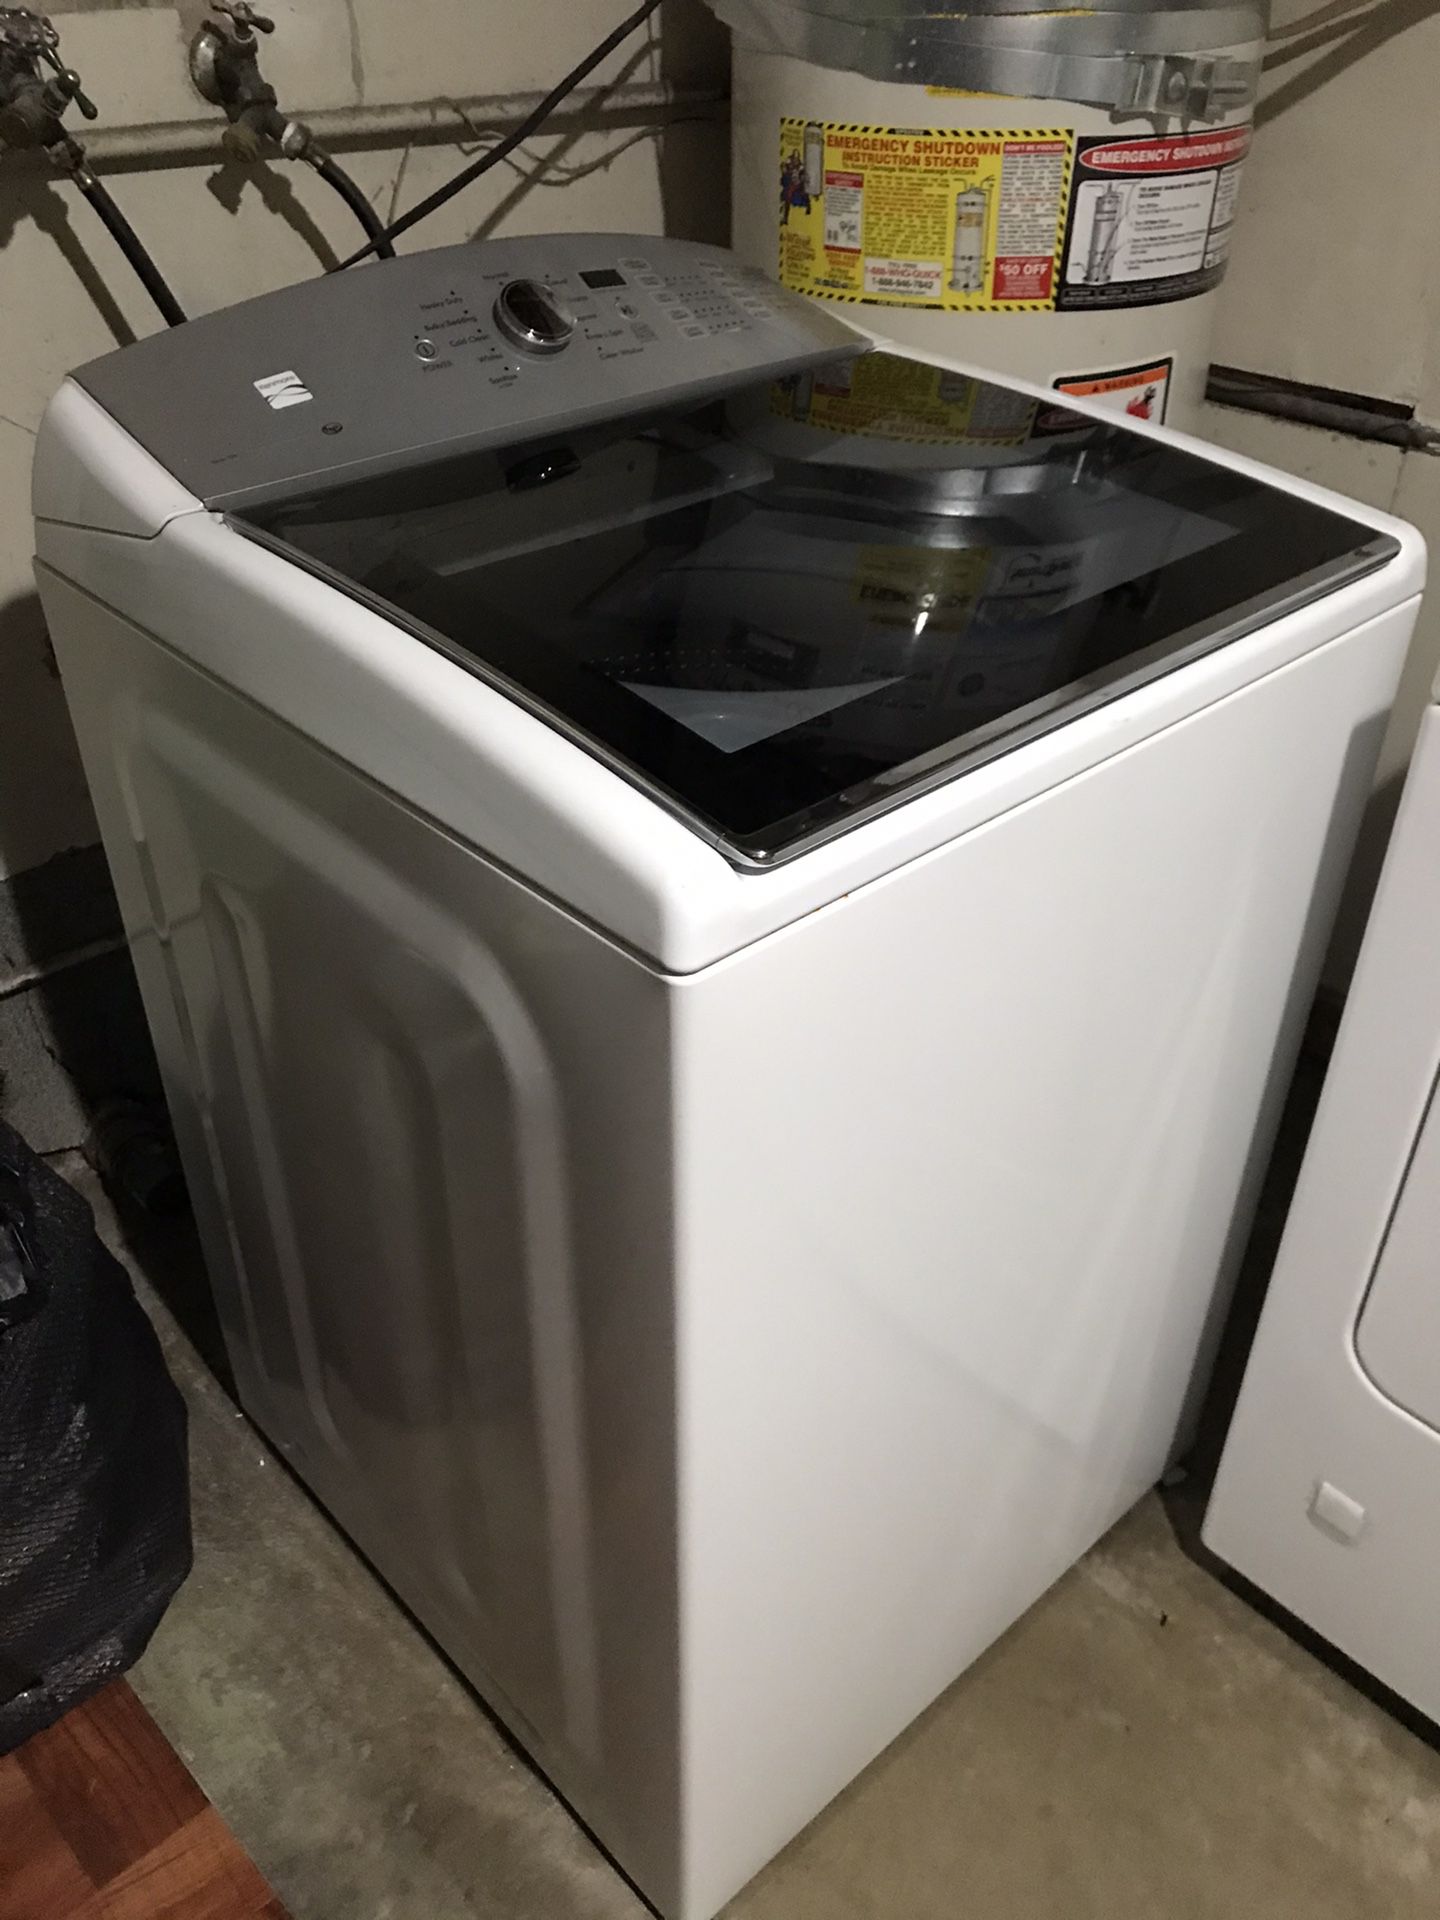 Auto Washer Kenmore brand very good condition $200